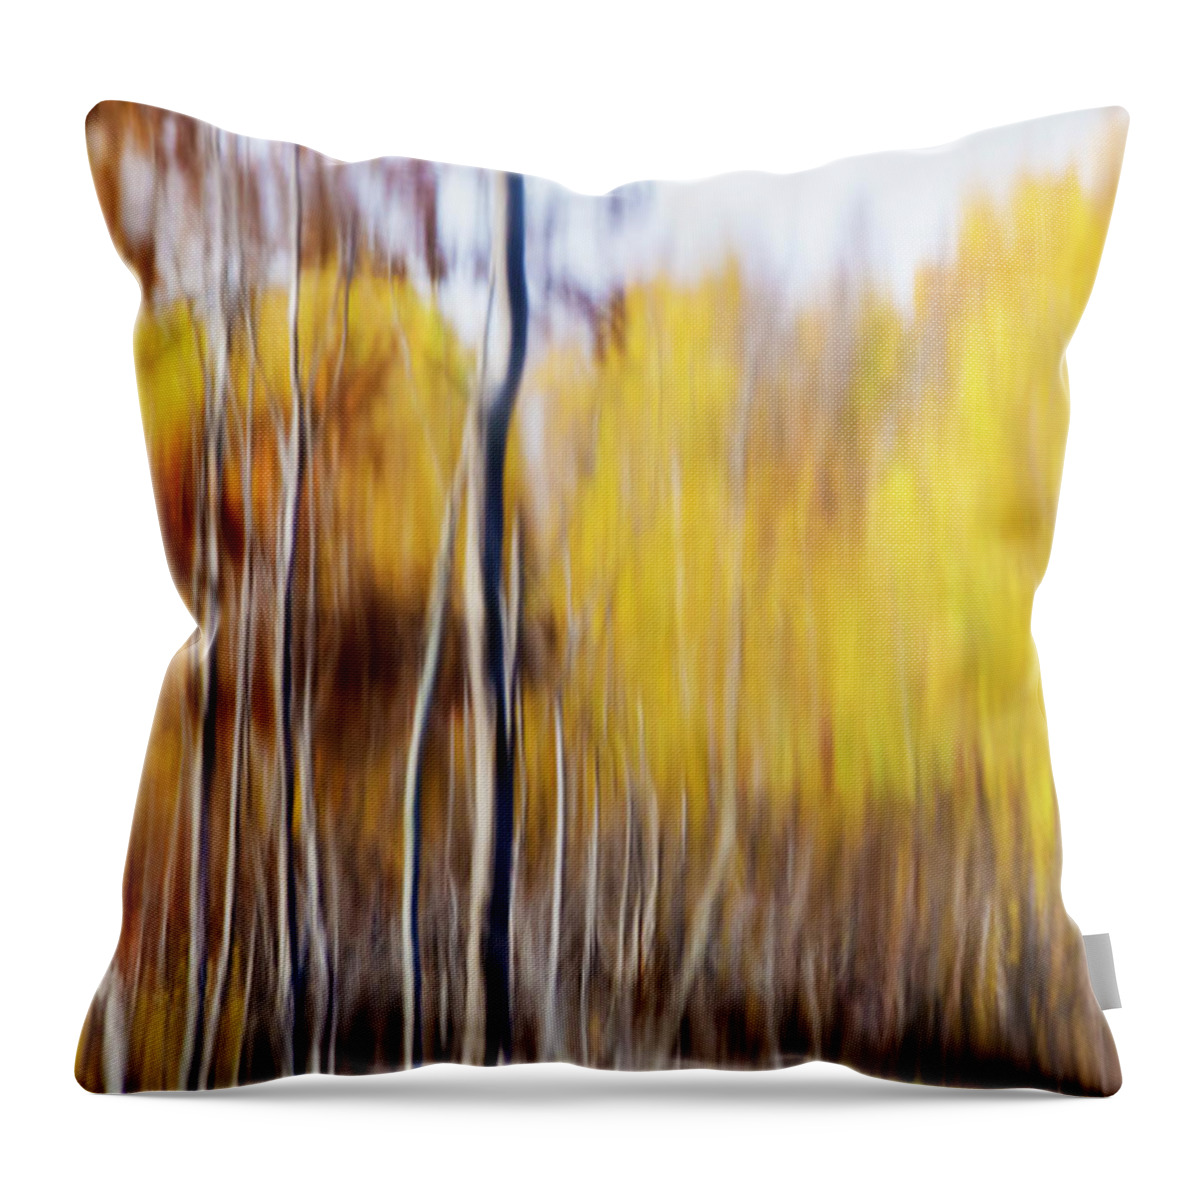 Abstract Throw Pillow featuring the photograph Fall Abstract by Mircea Costina Photography